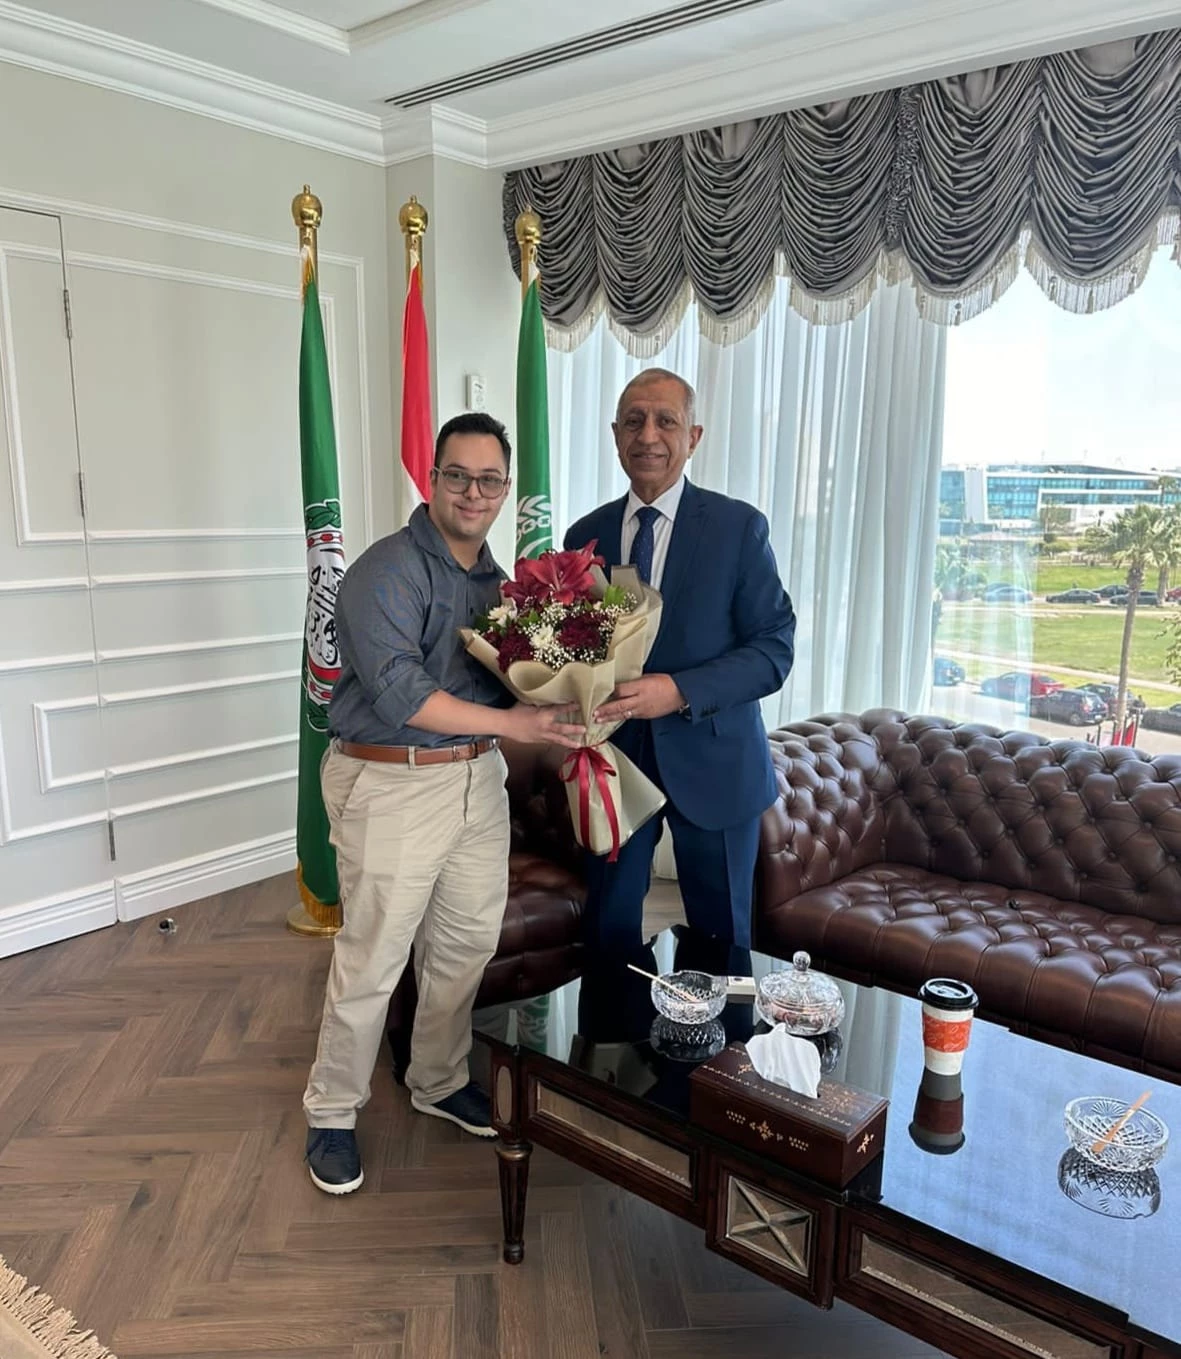 The president of the academy receives the student of the challenge, Youssef Sharif, the Egyptian champion of Table Tennis